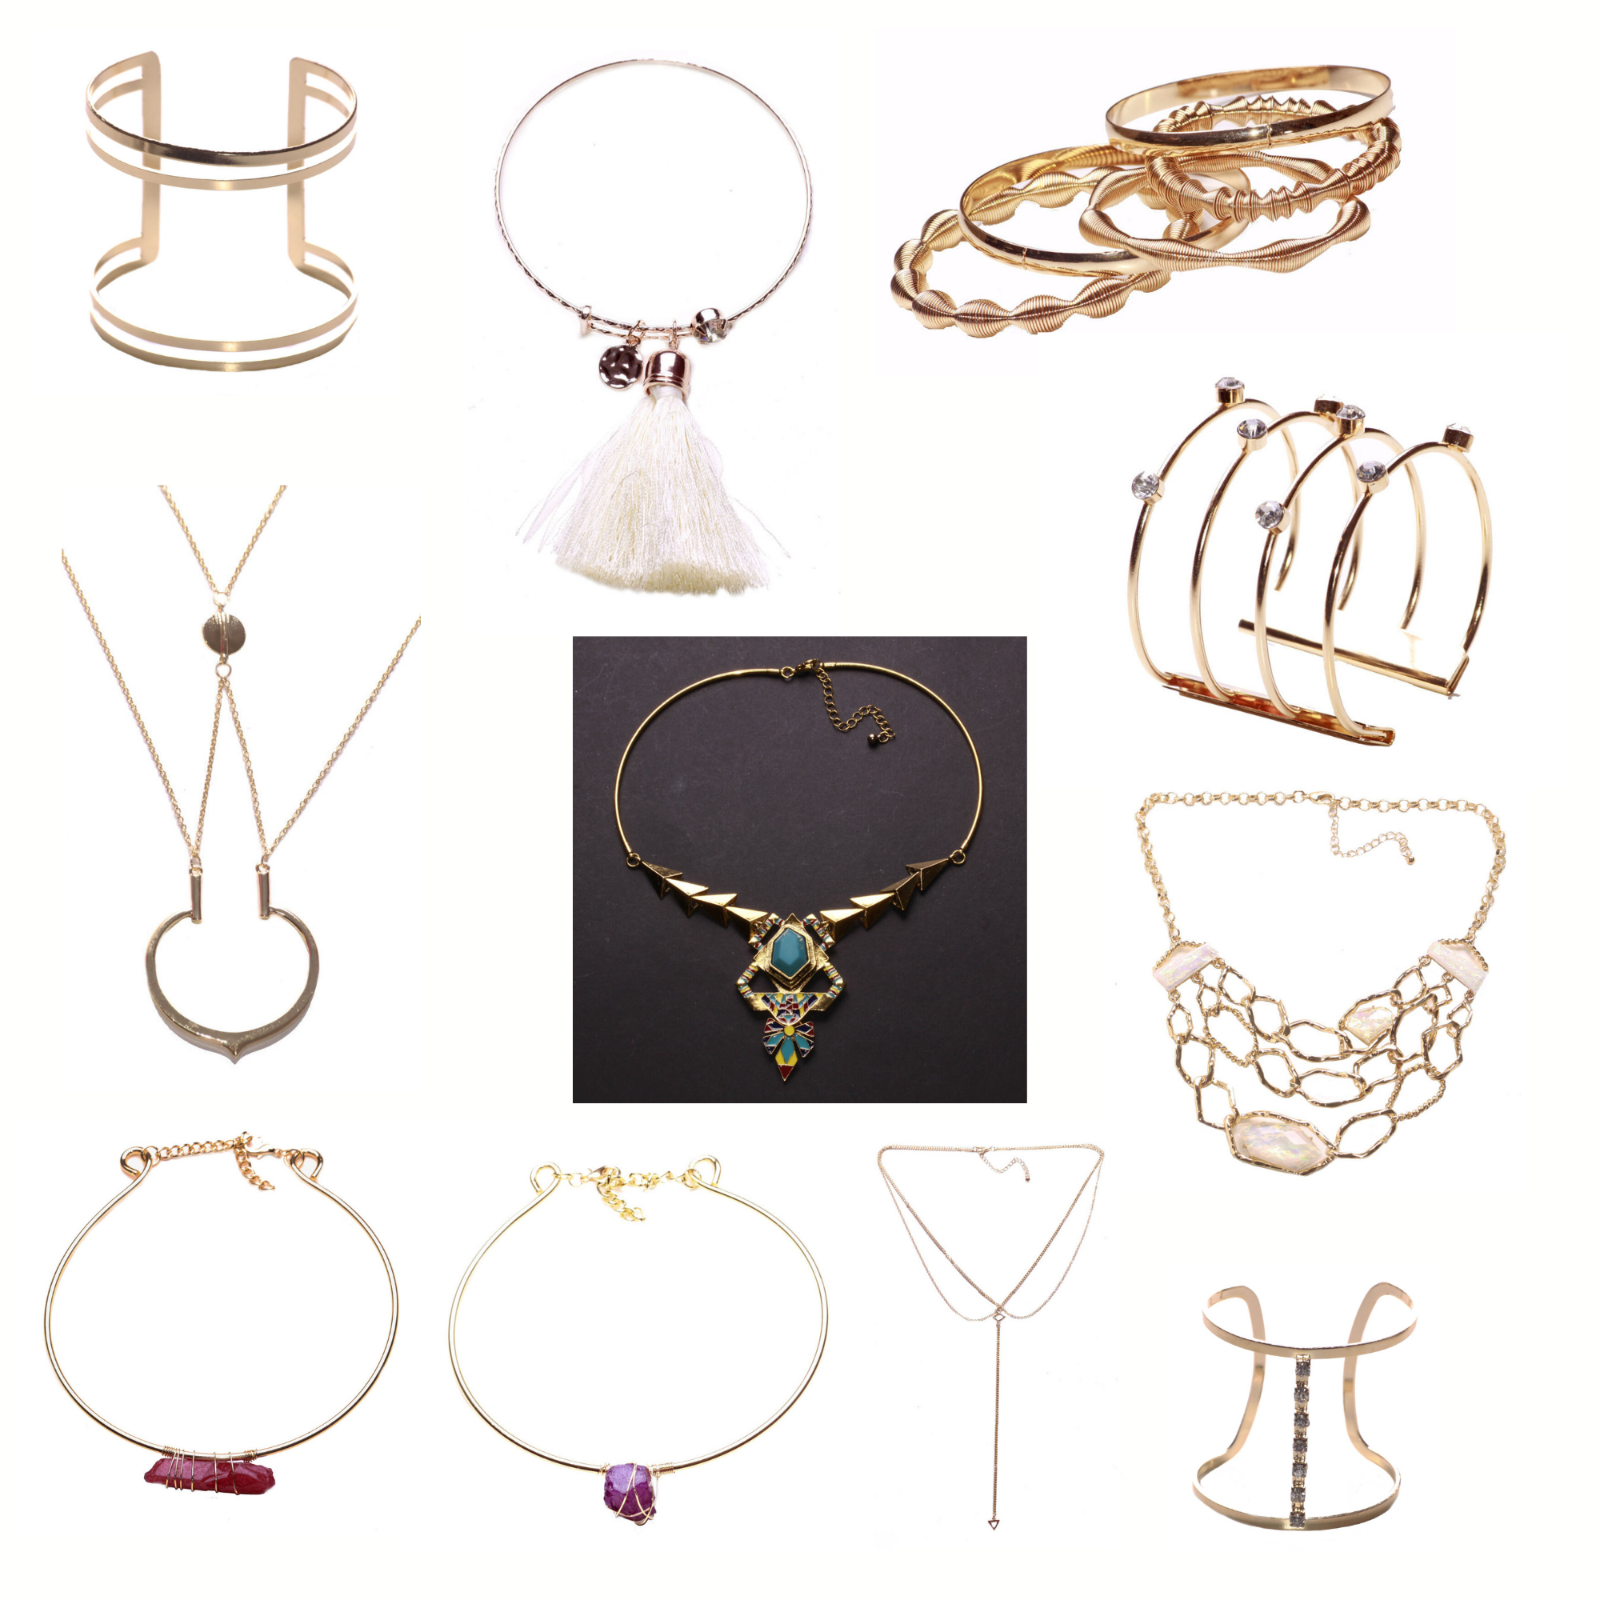 MIX COSTUME JEWELLERY & FASHION ACCESSORIES JOB LOT - EXCELLENT VALUE